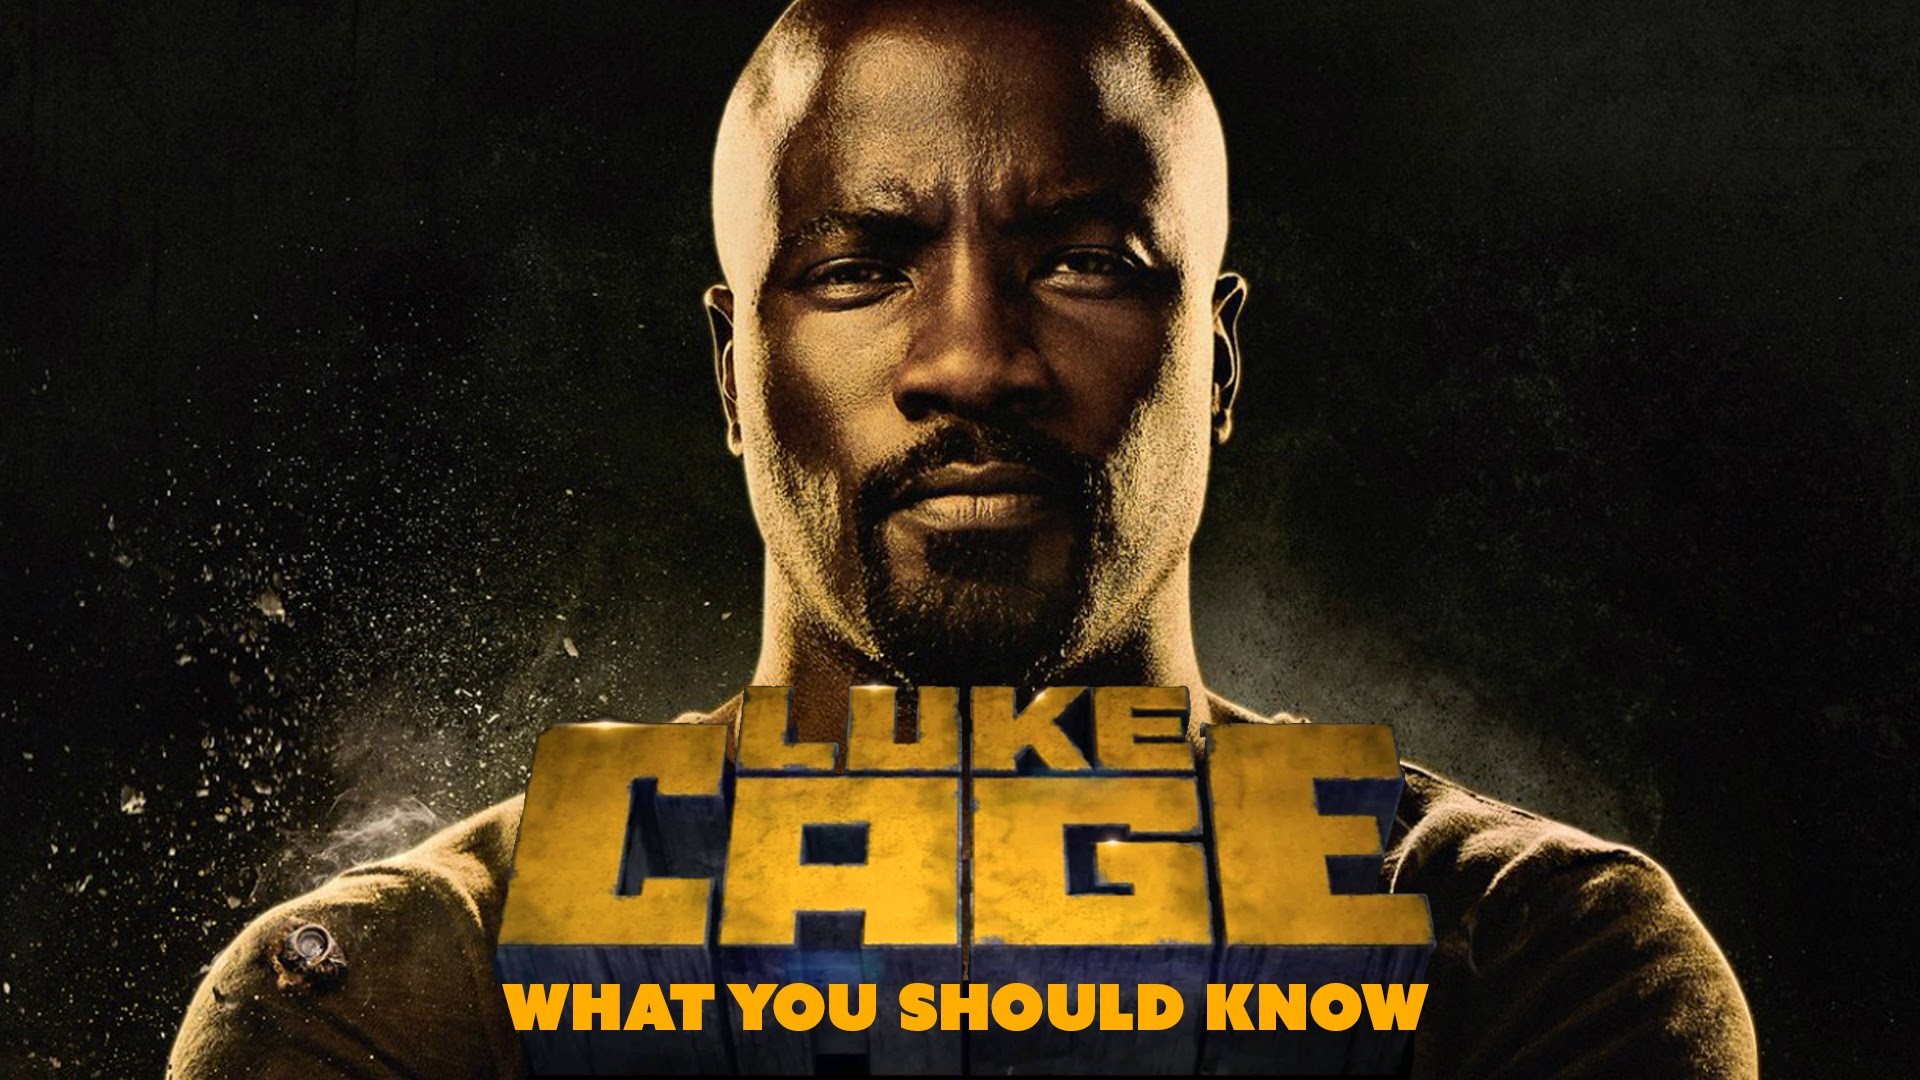 luke cage wallpaper,movie,action film,poster,fictional character,photo caption